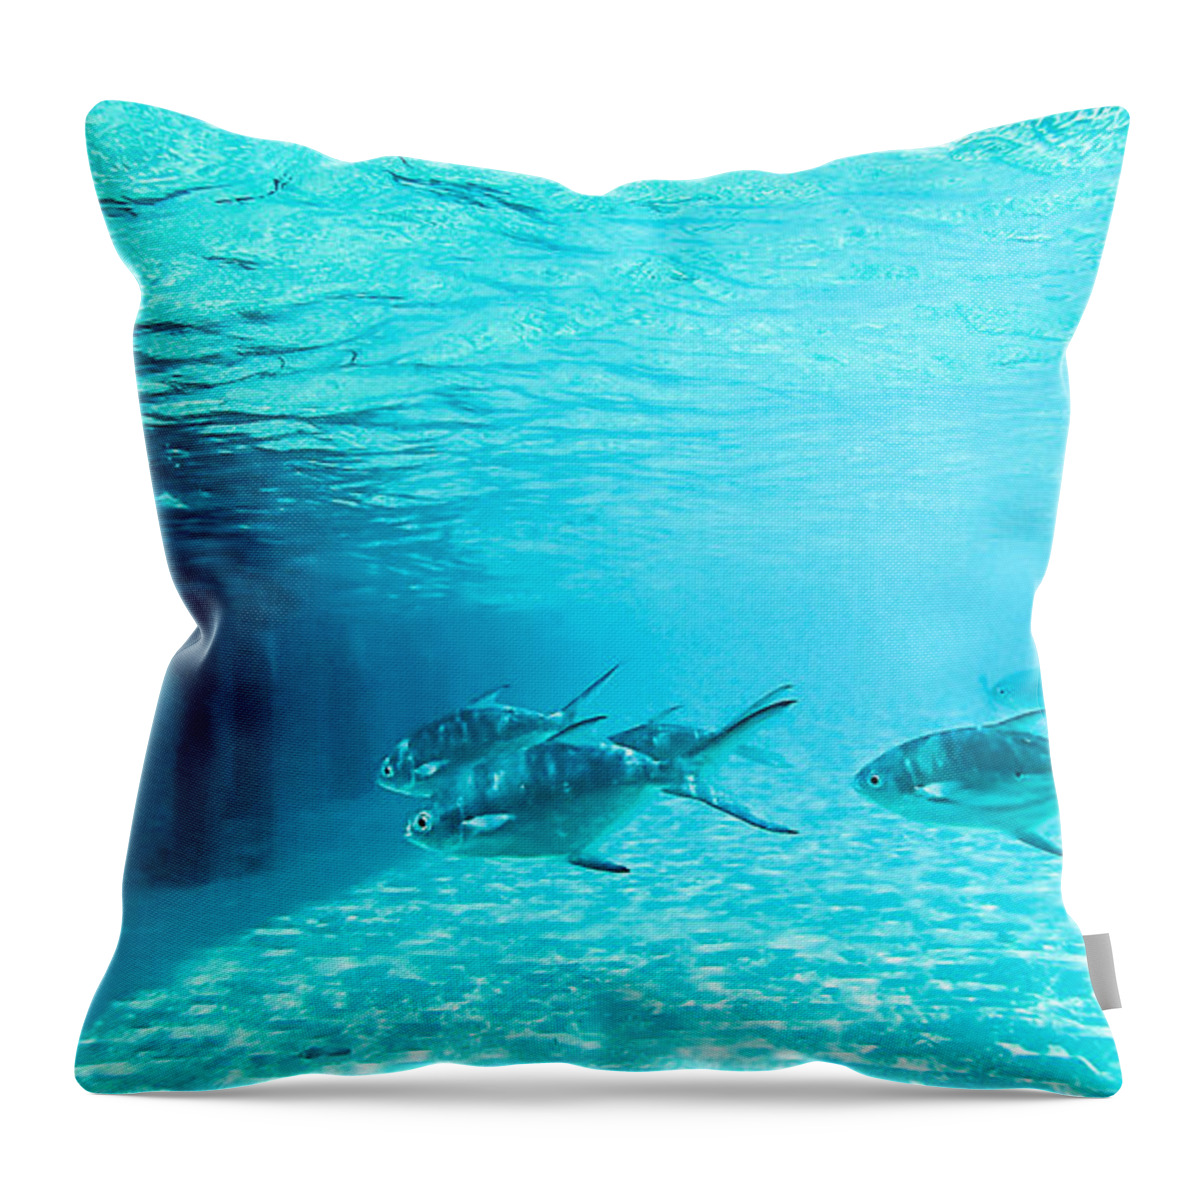 Animal Throw Pillow featuring the photograph In The Turquoise Water by Hannes Cmarits